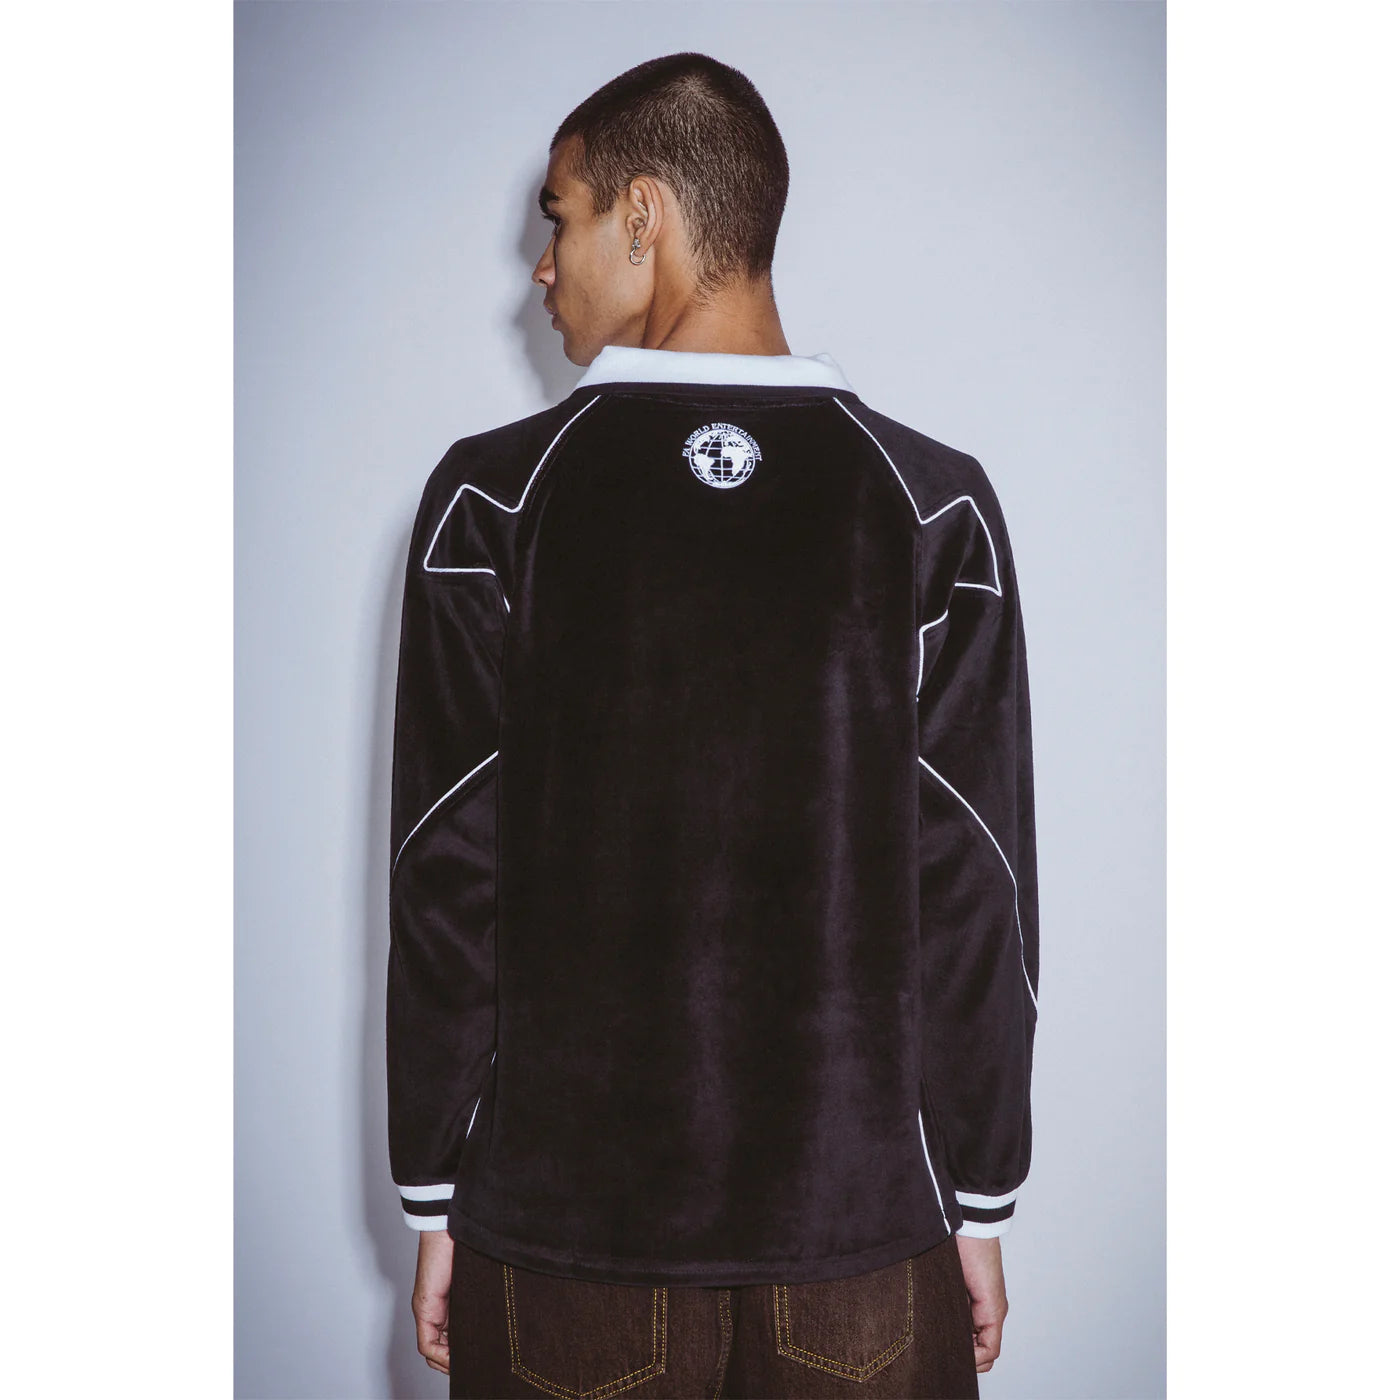 Velour Soccer Jersey L/S Shirt Blk(size options listed)